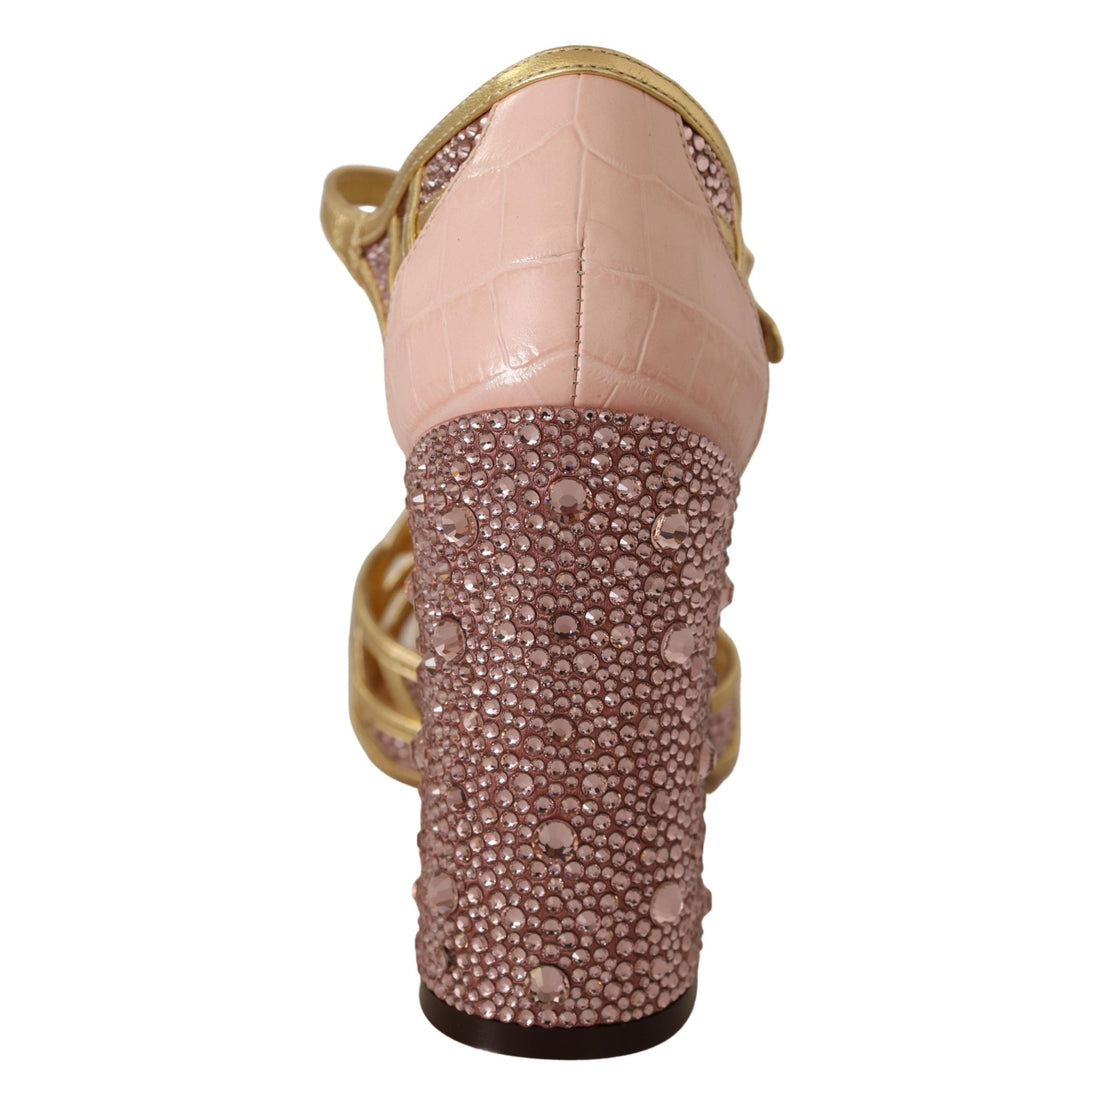 Dolce & Gabbana Pink Gold Leather Crystal Pumps T-strap Shoes - Paris Deluxe